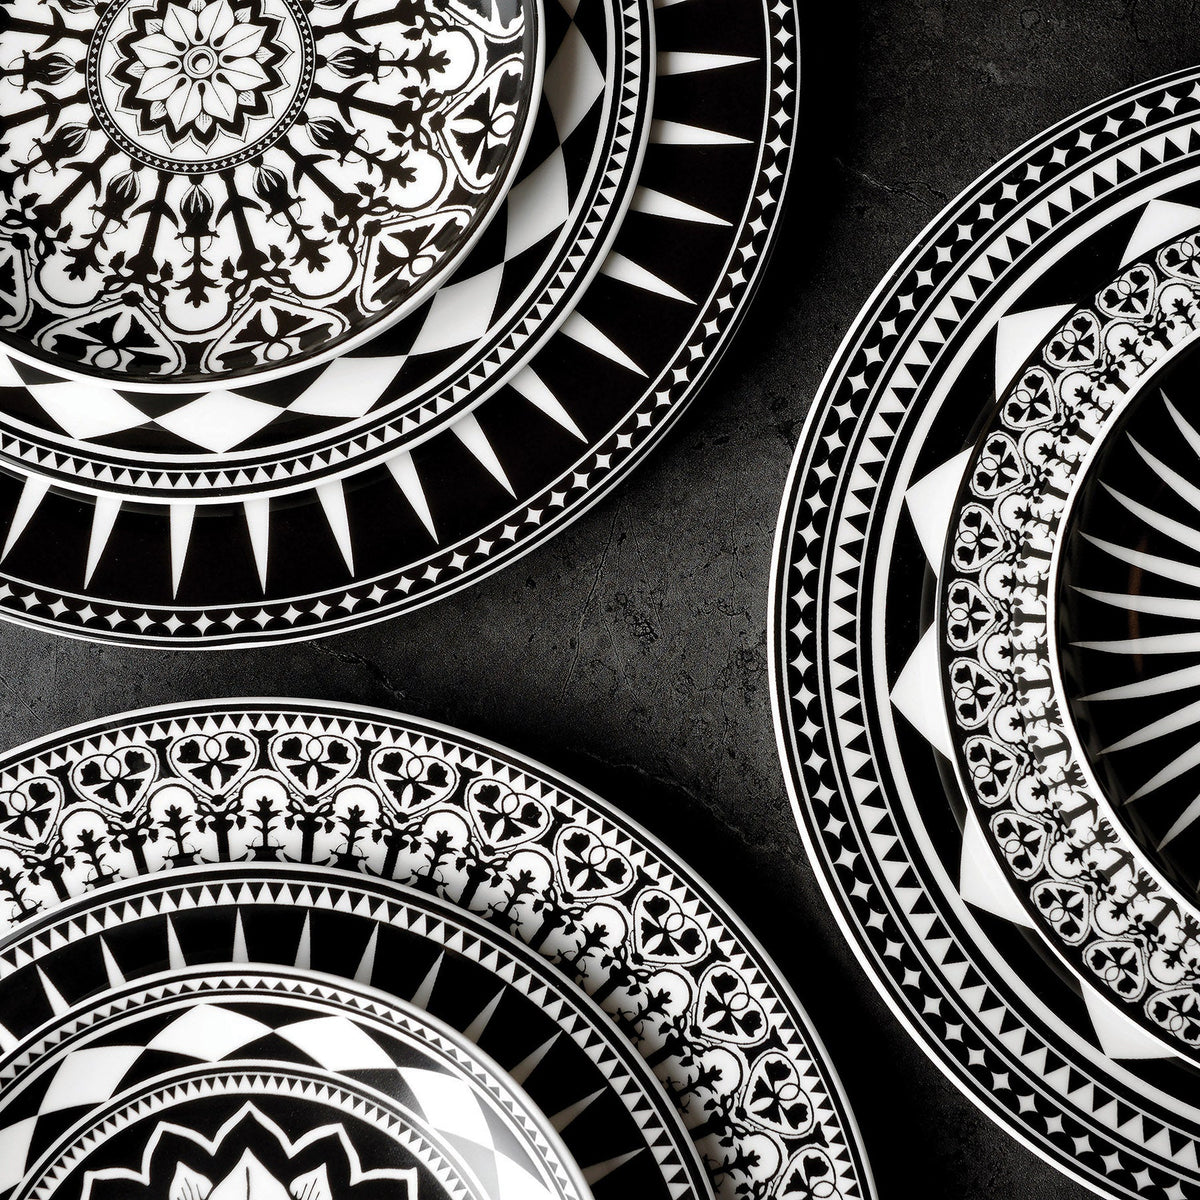 The Caskata Artisanal Home&#39;s Marrakech Black Rimmed Dinner Plate showcases exquisite black and white plates adorned with stunning Art Deco forms.